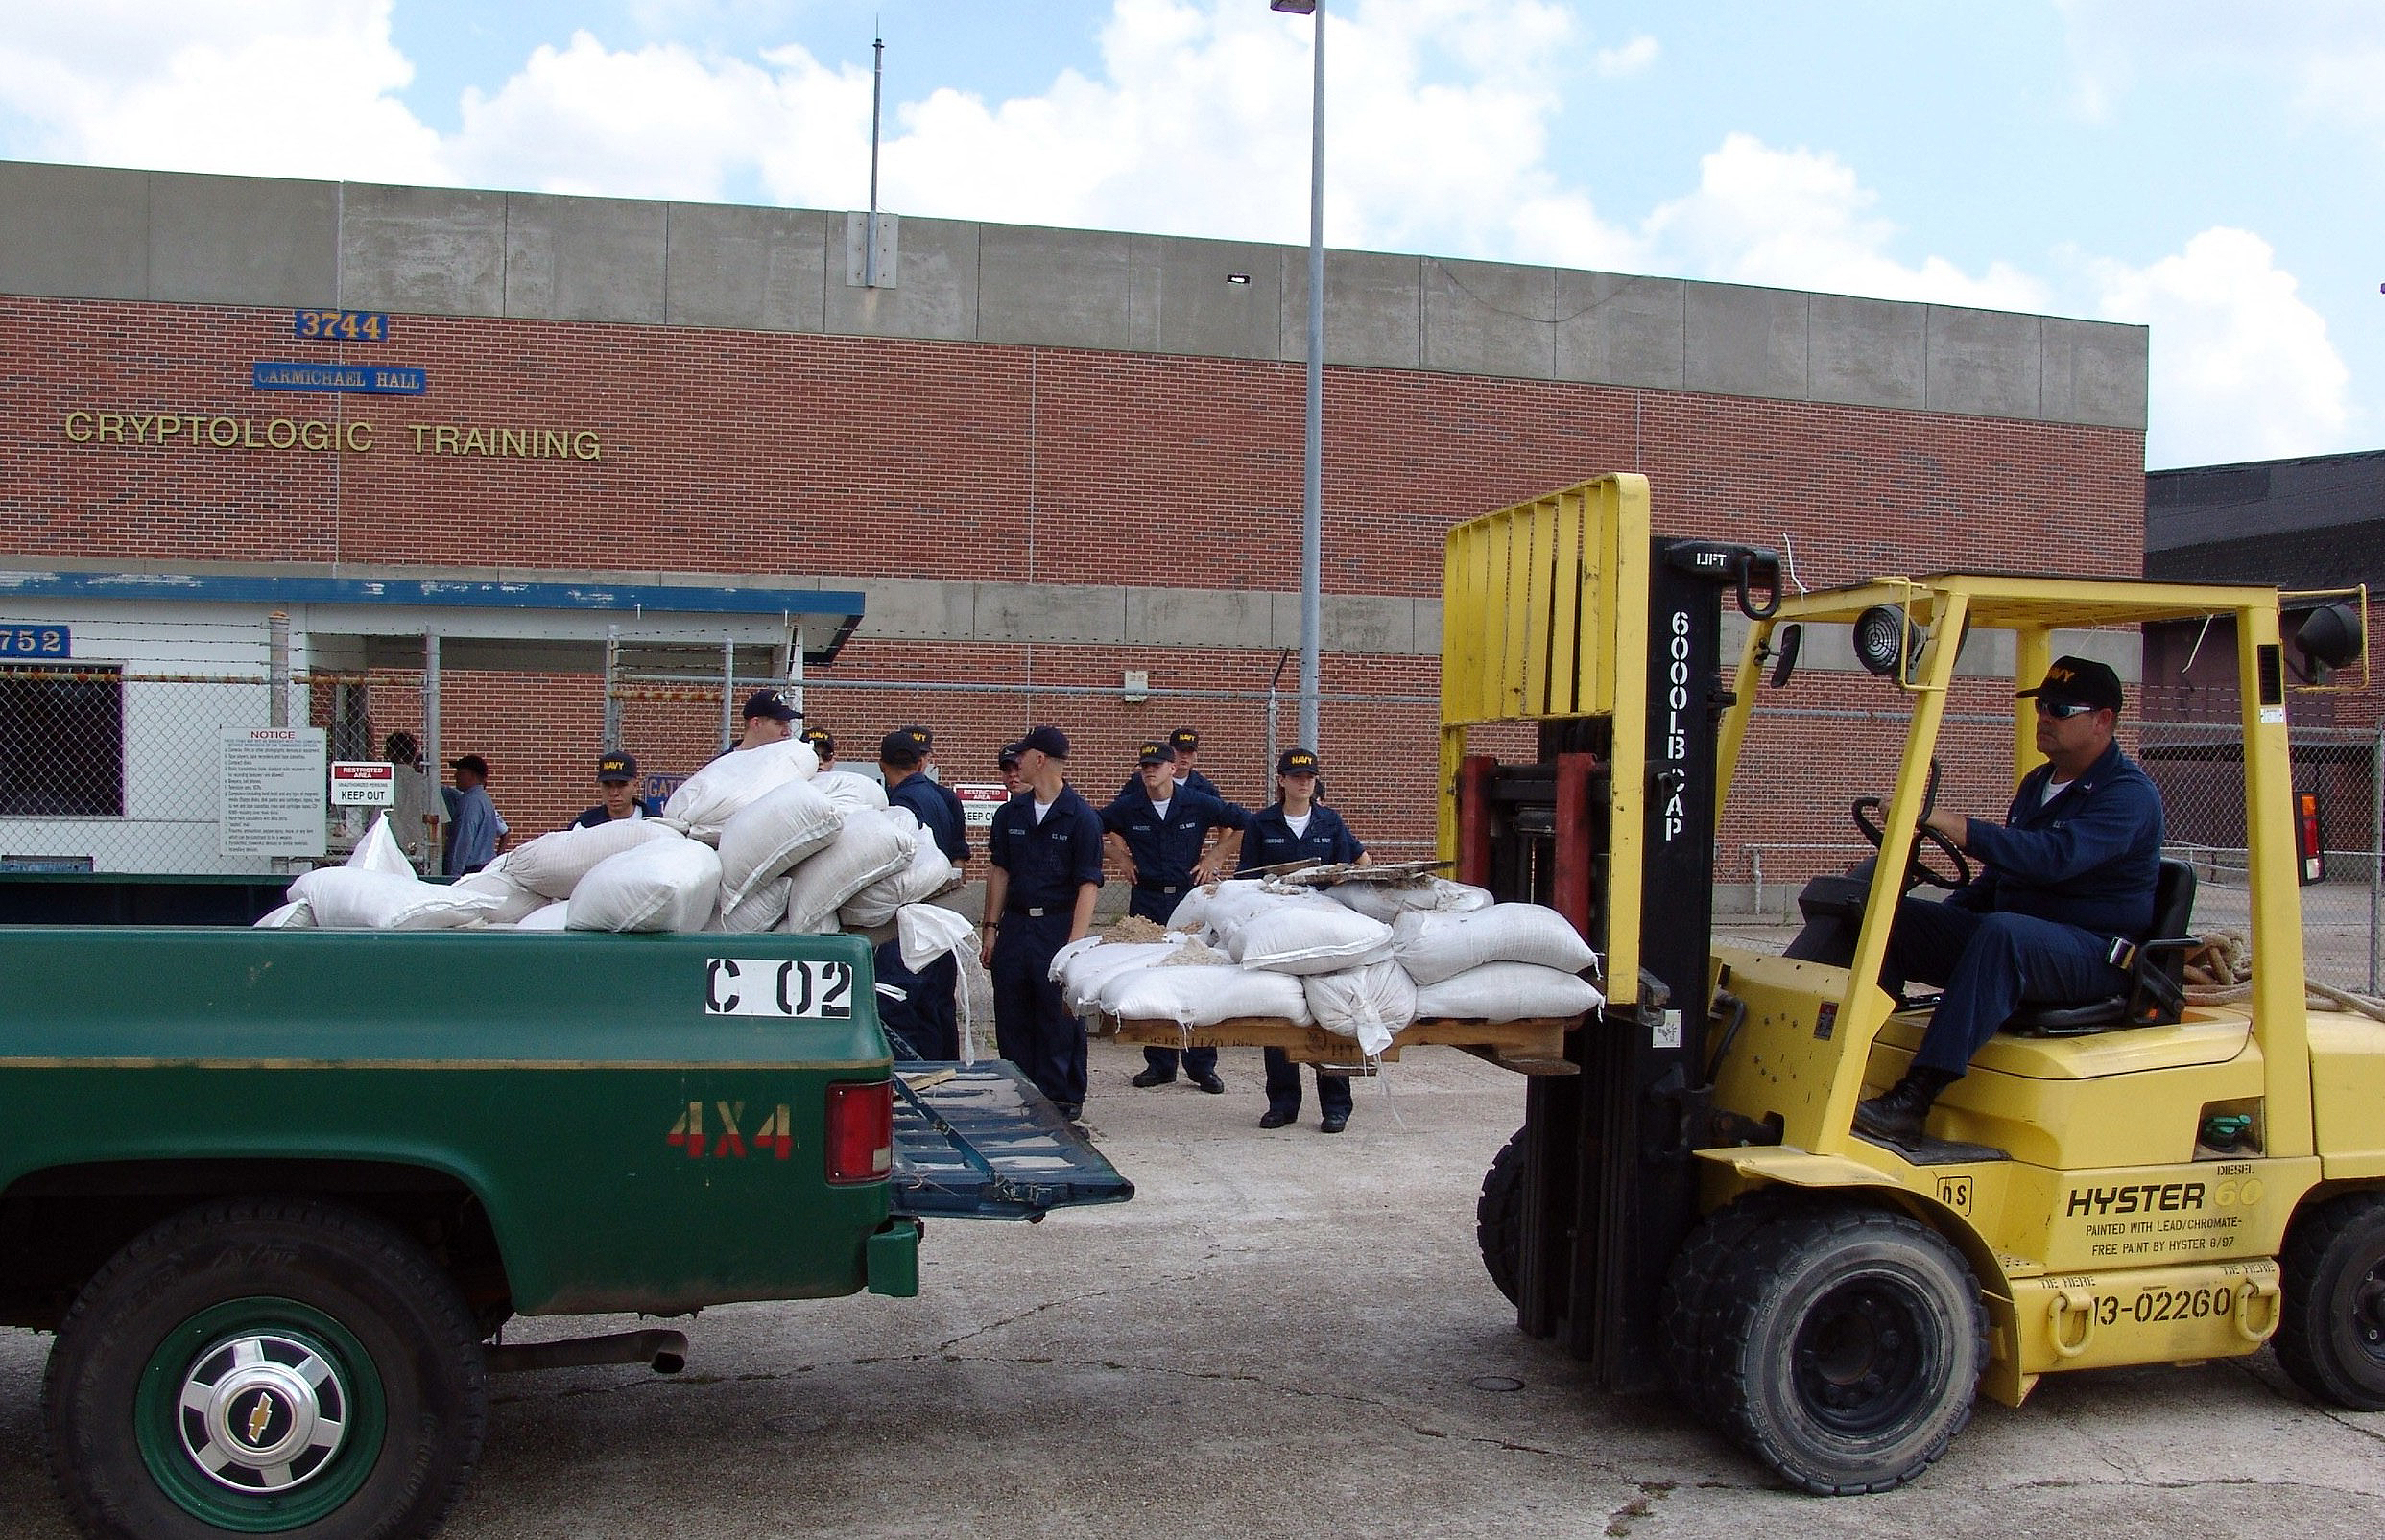 US Navy 050708-N-9246G-016 Cryptologic Technician 1st Class Henry Hughes unloads pallets of sand bags at the Center for Information Dominance, Corry Station, as awaiting Sailors prepare to place them around exterior doorways.jpg